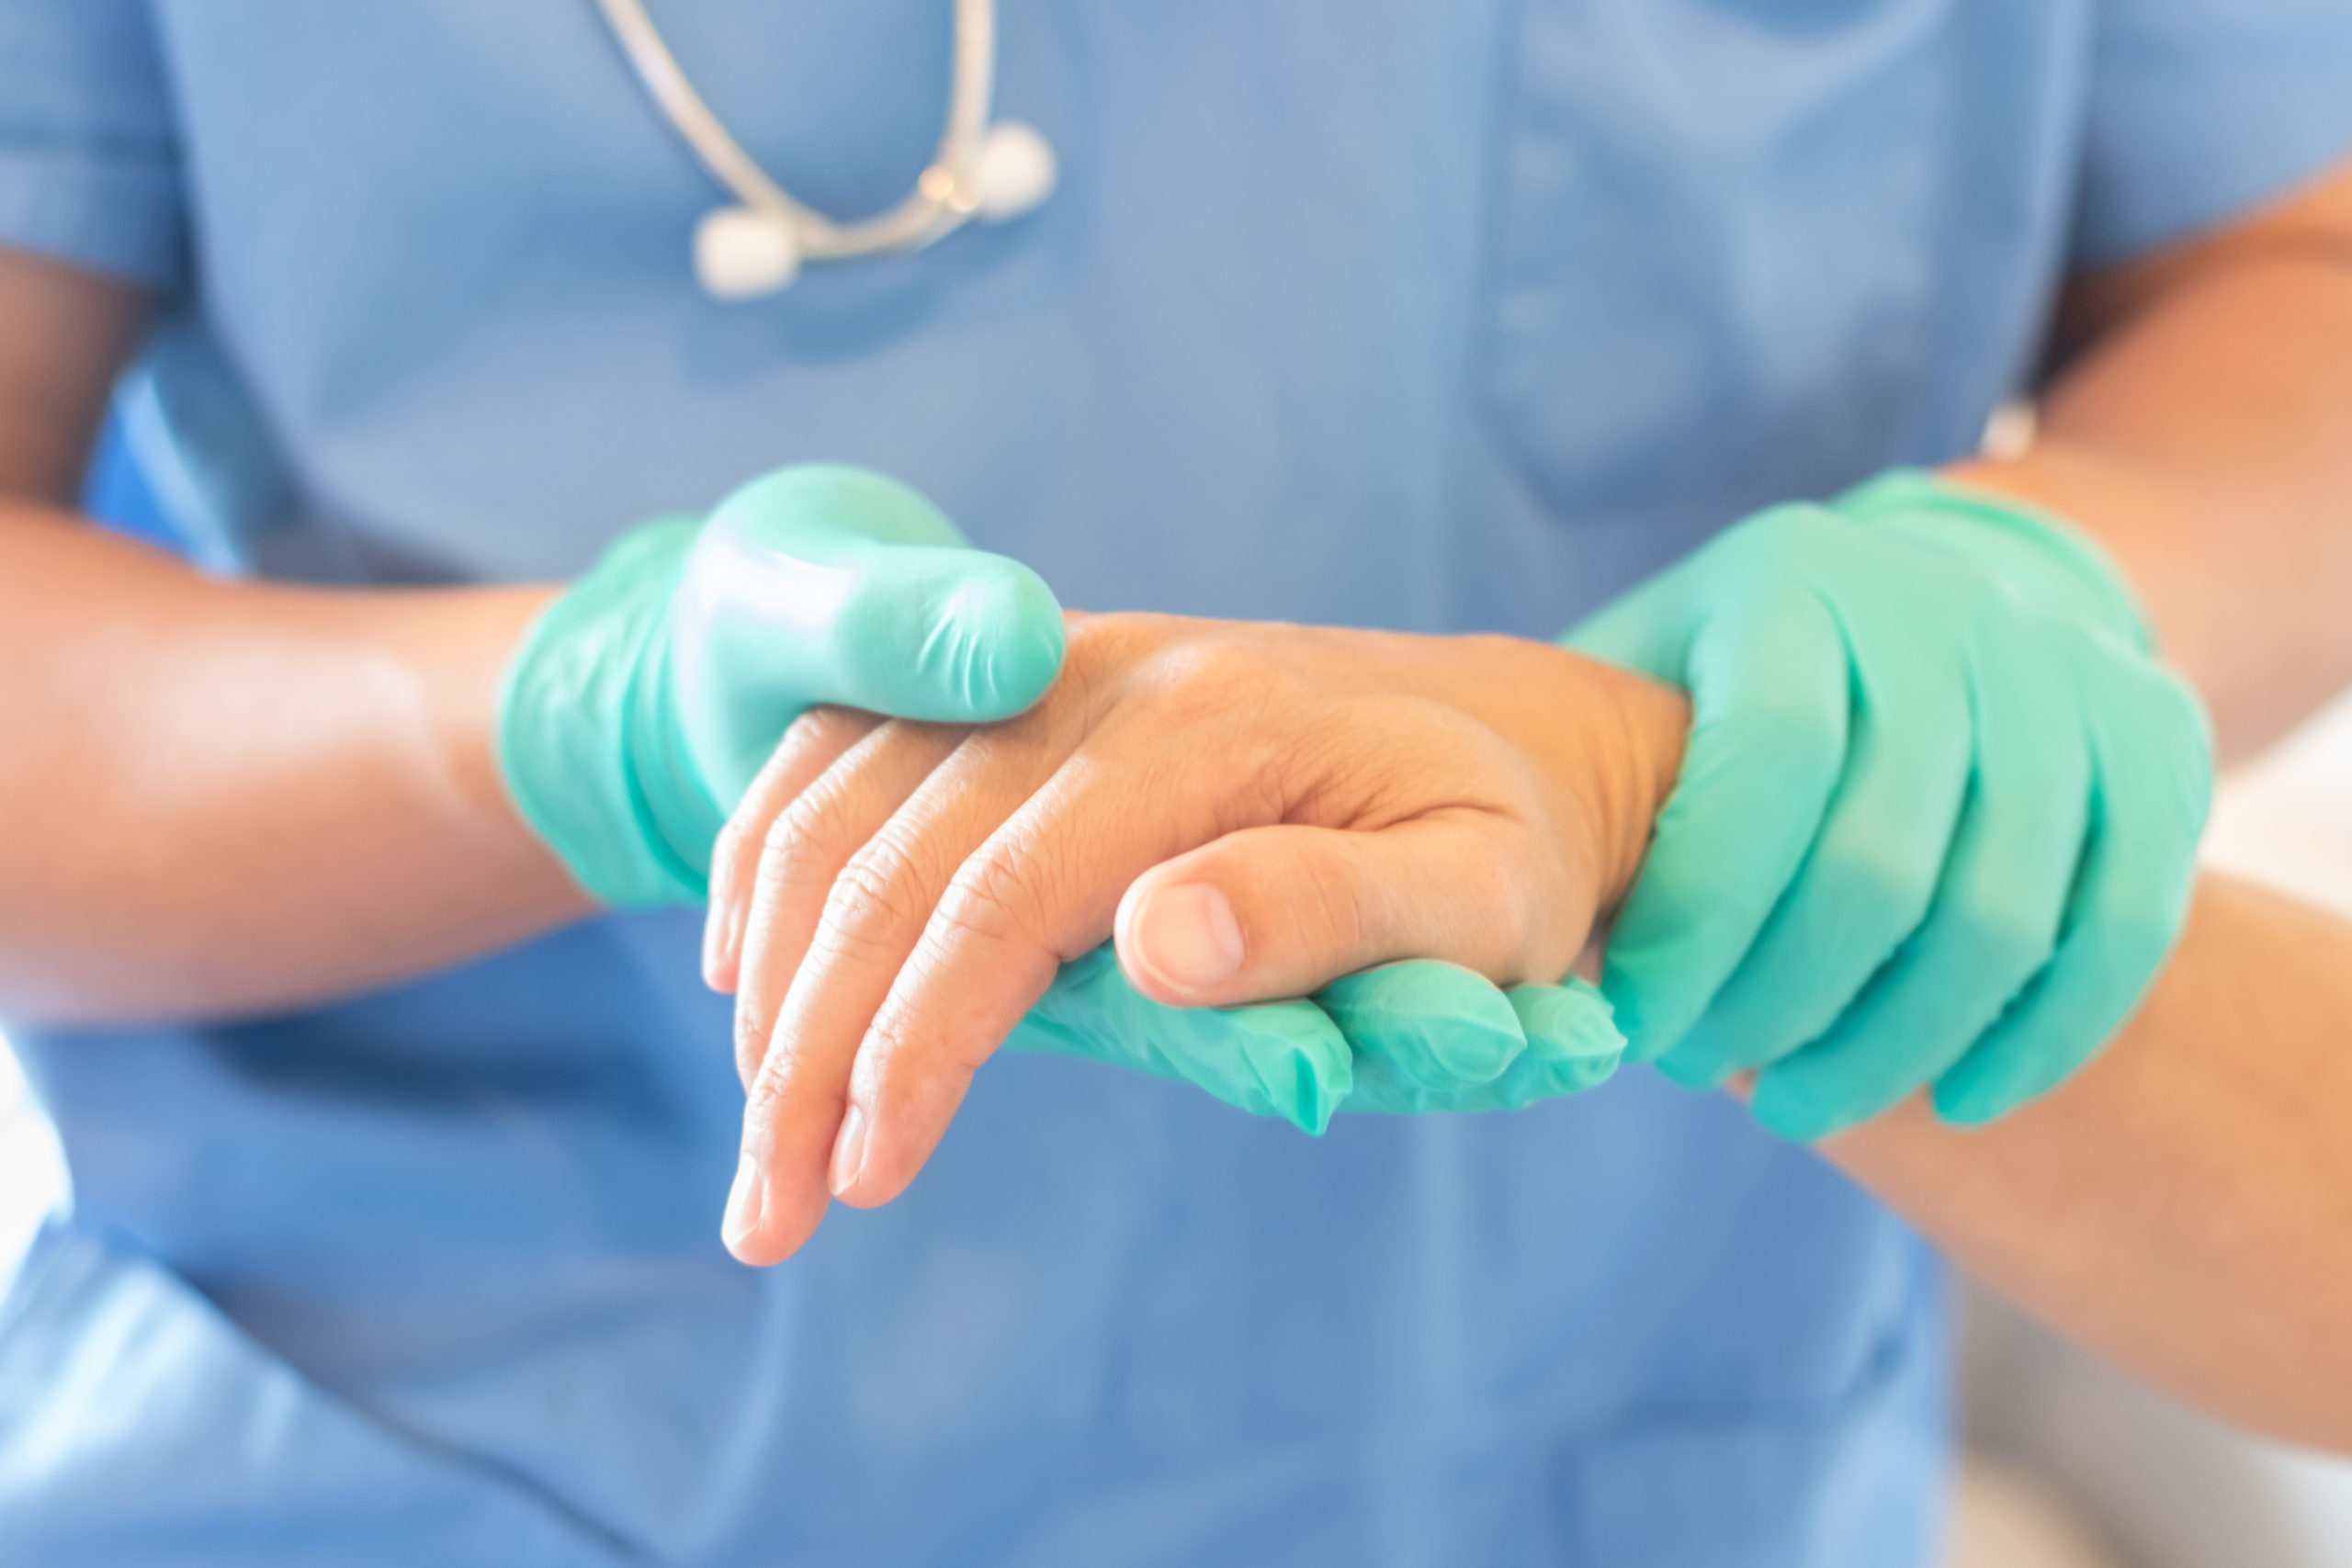 Health professional in a blue uniform wearing green medical gloves holding a patients hand.